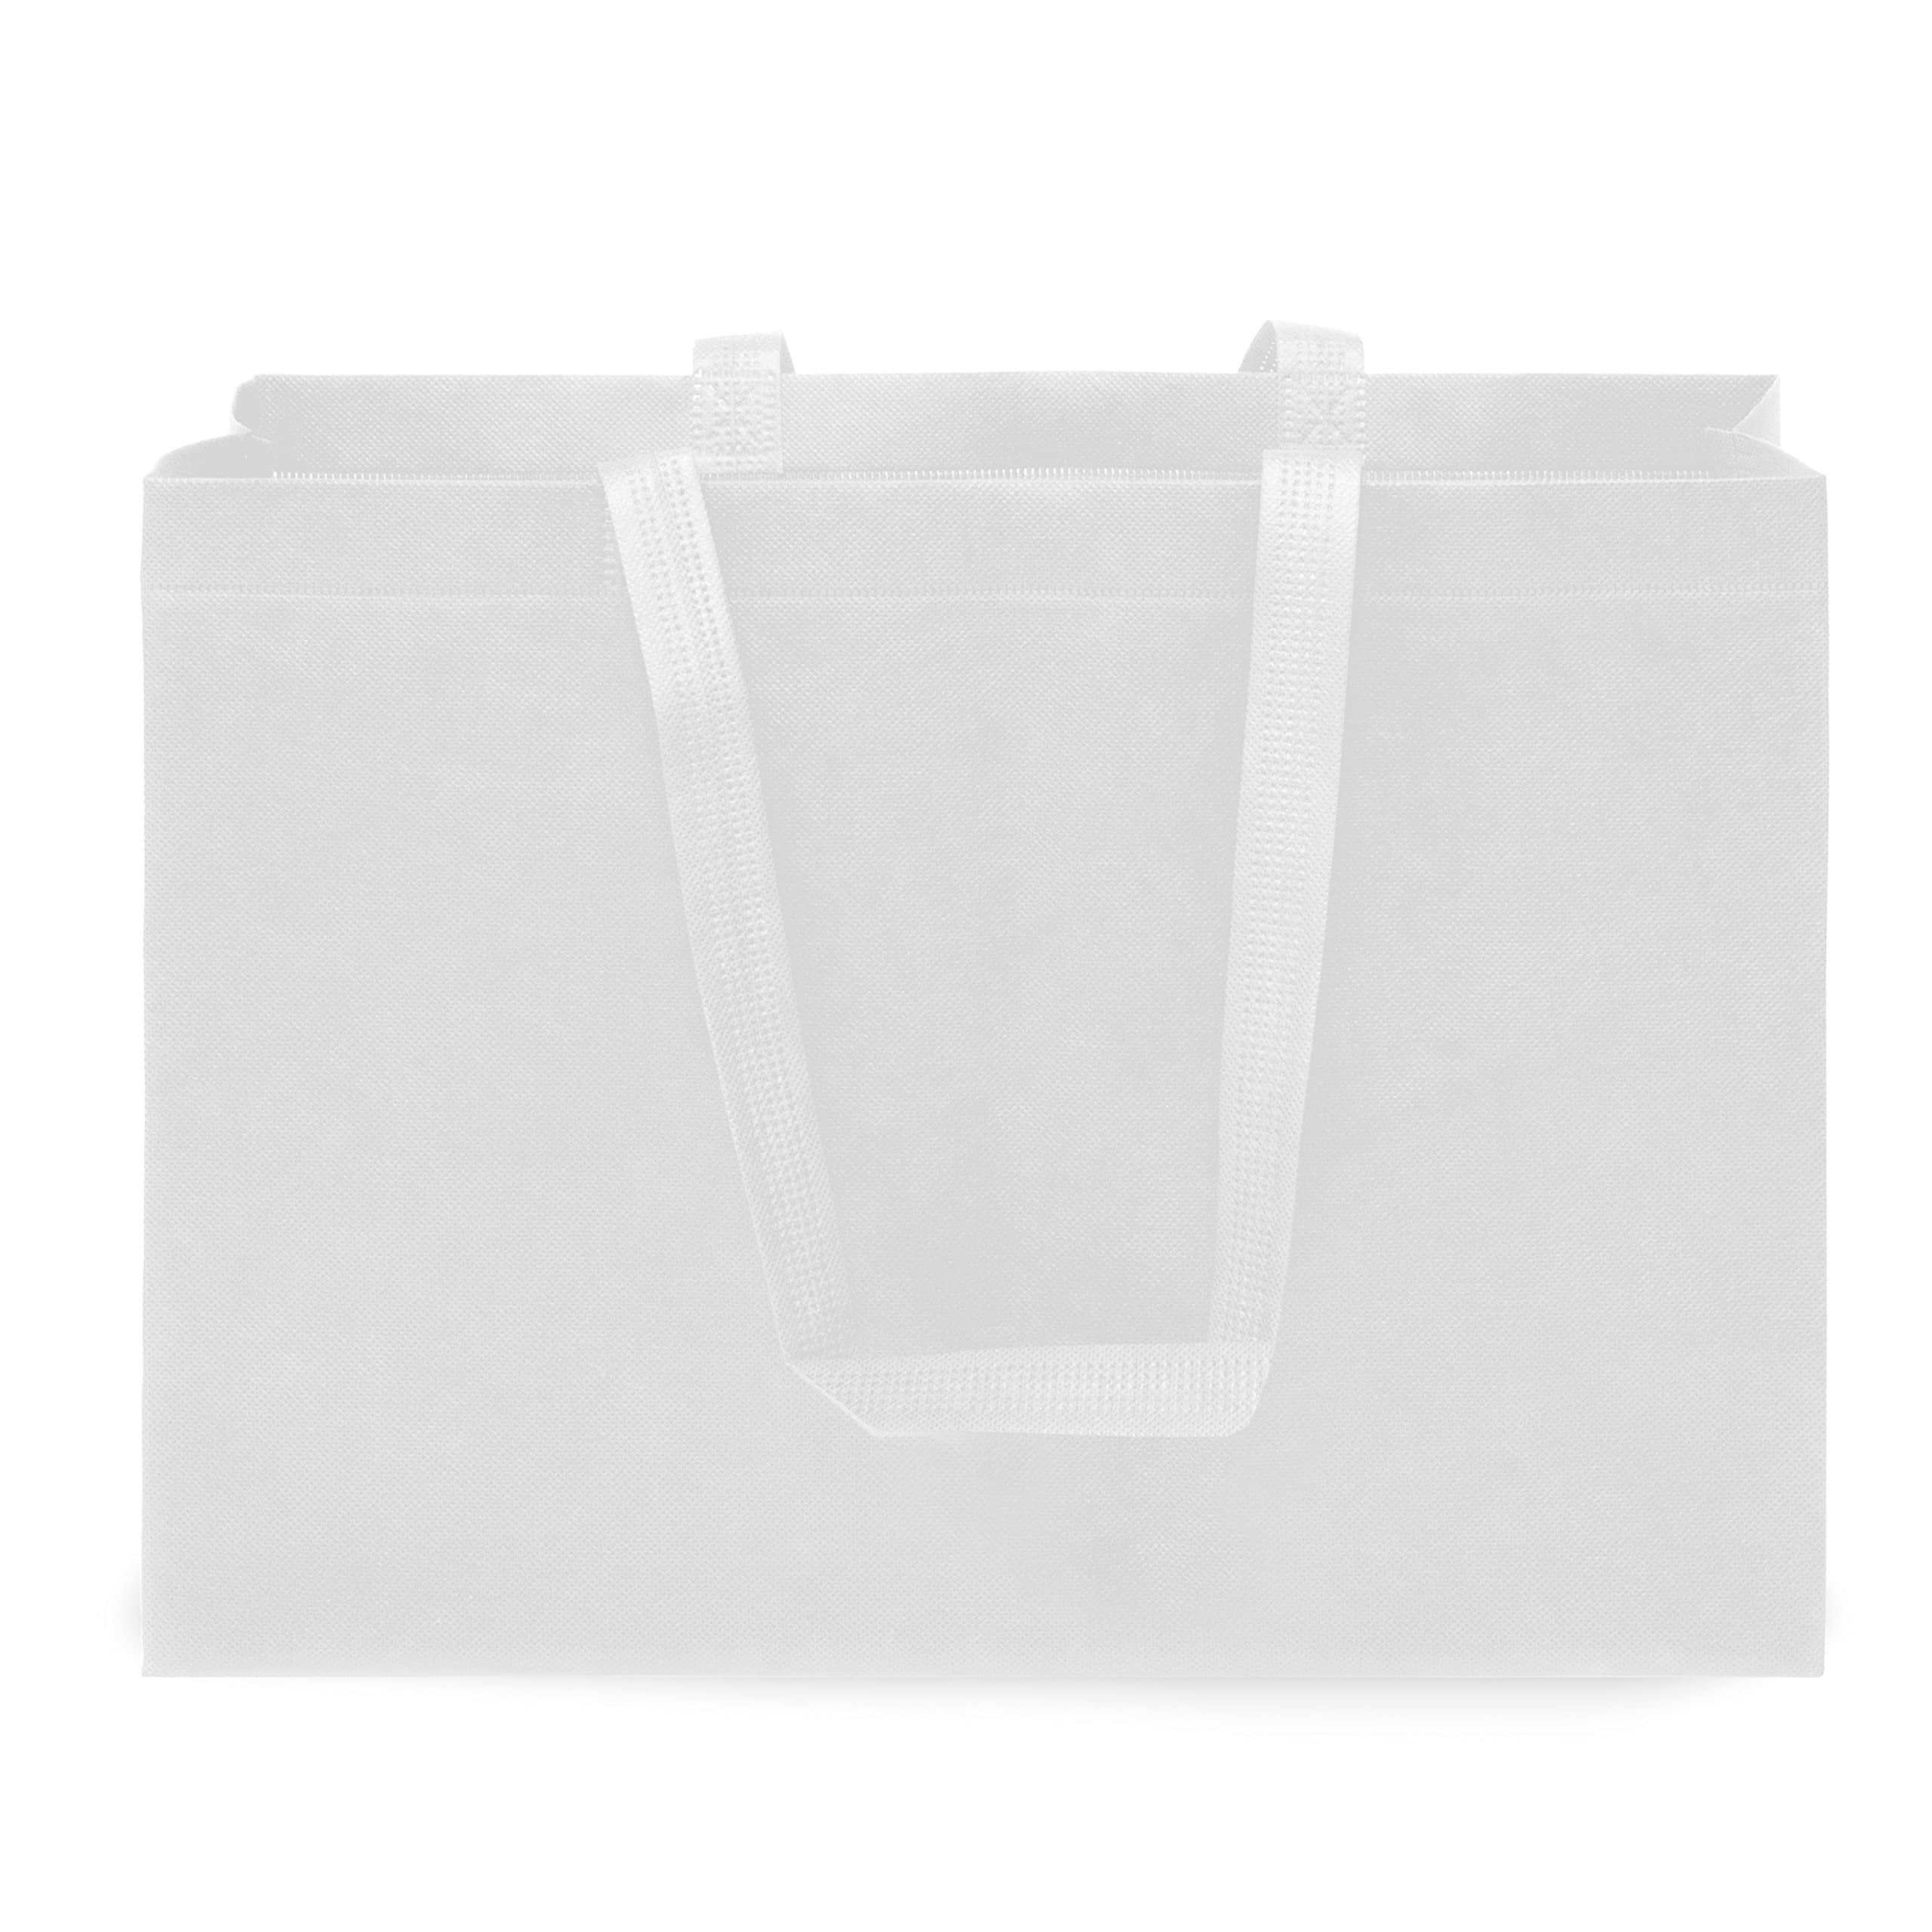 Eco-Friendly Reusable Gift Bags - 12 Pack Large Totes for Shopping & Events - White Cloth with Handles, Size 16x6x12